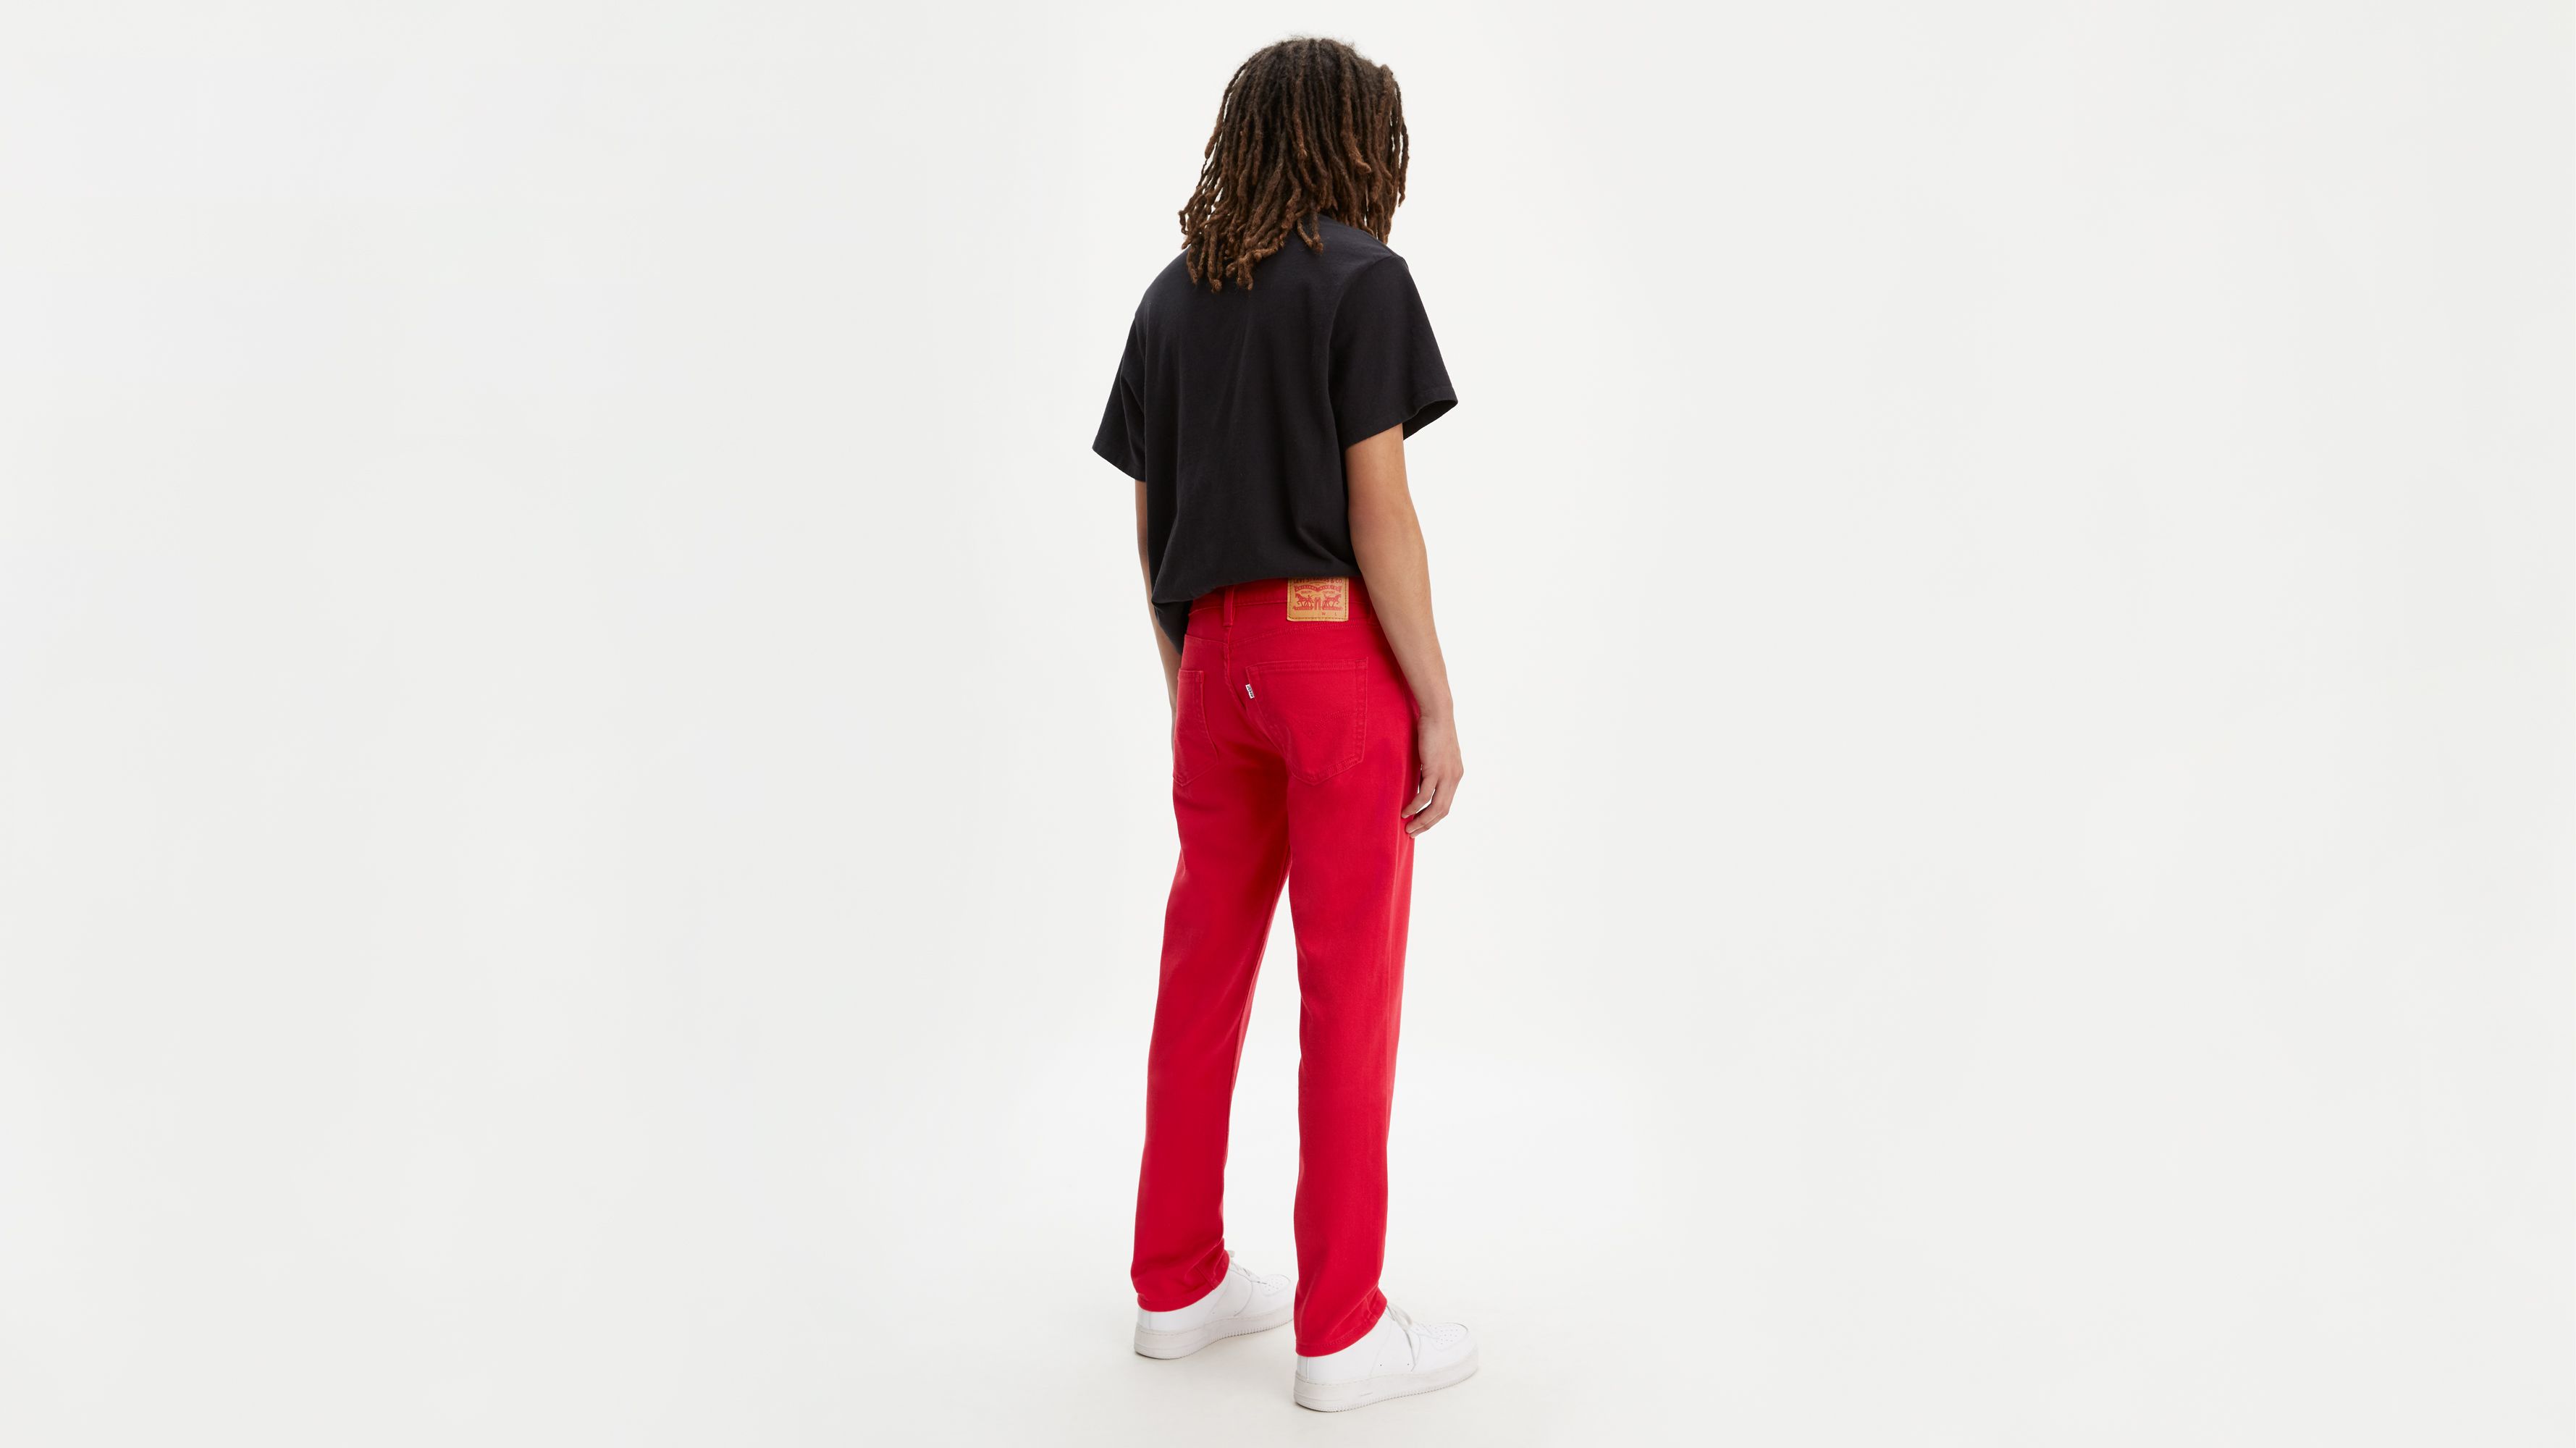 levi's 511 red